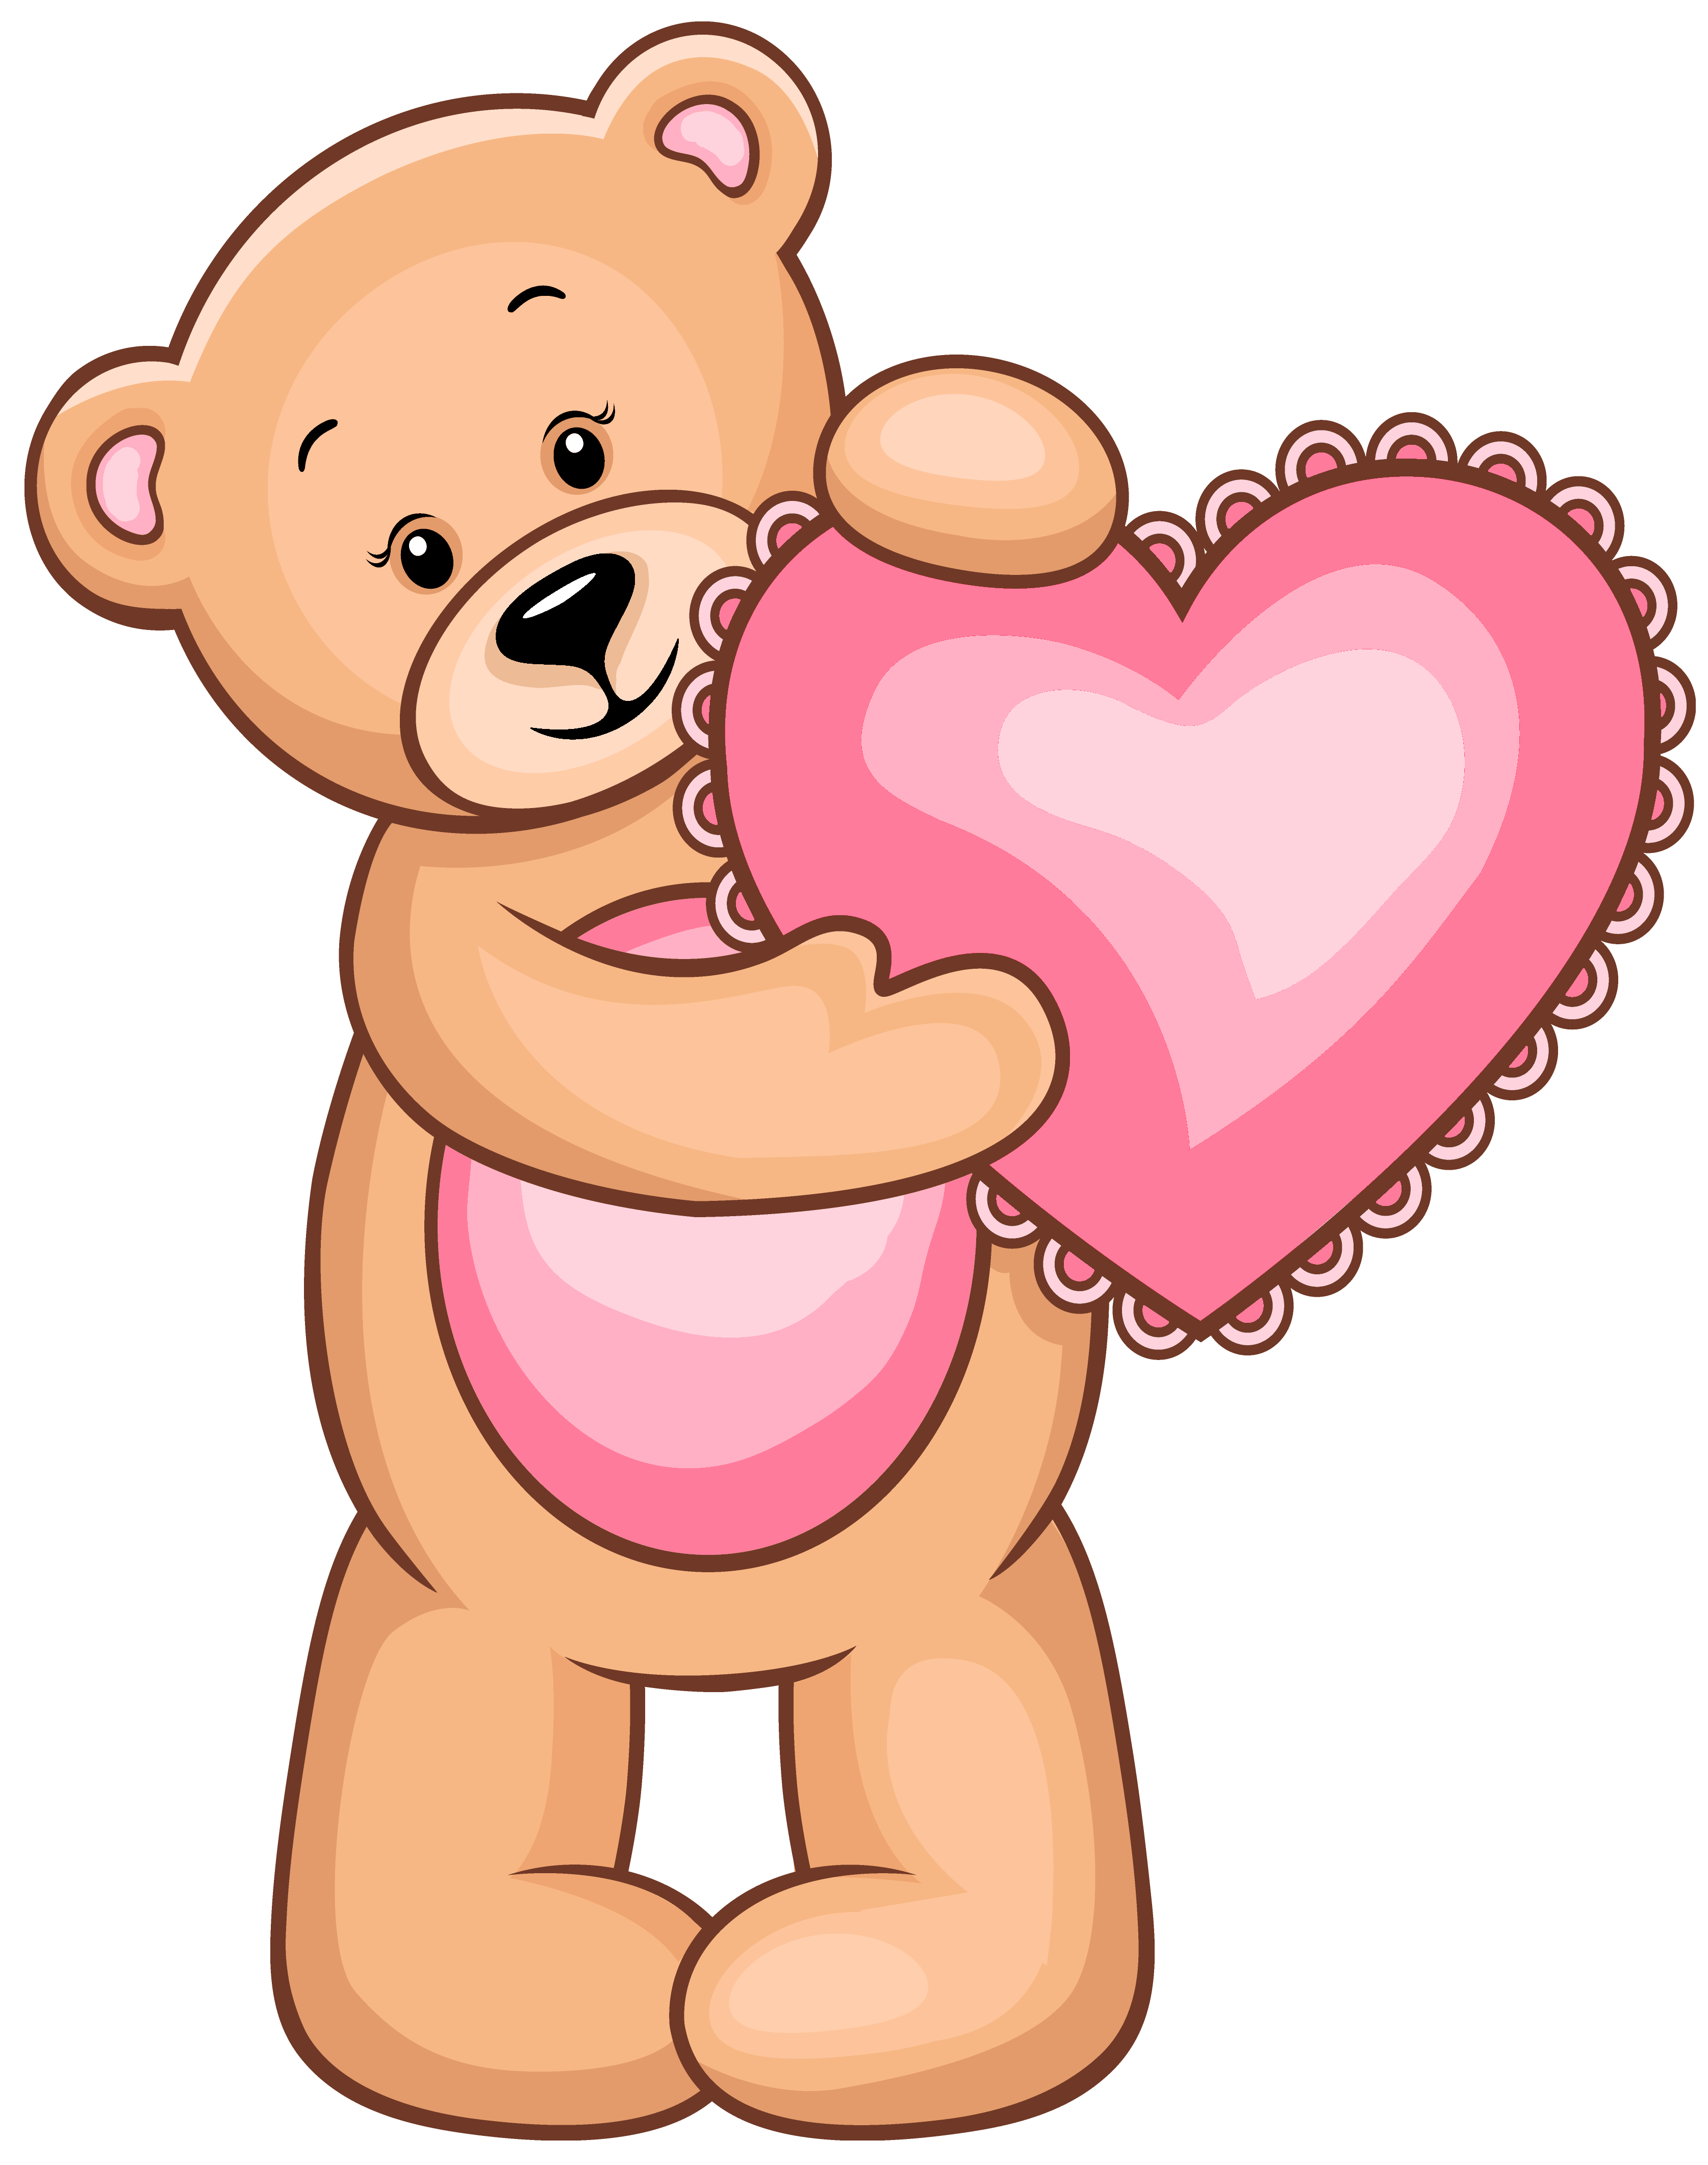 Teddy Bear Heart Clip Art Images  Pictures - Becuo